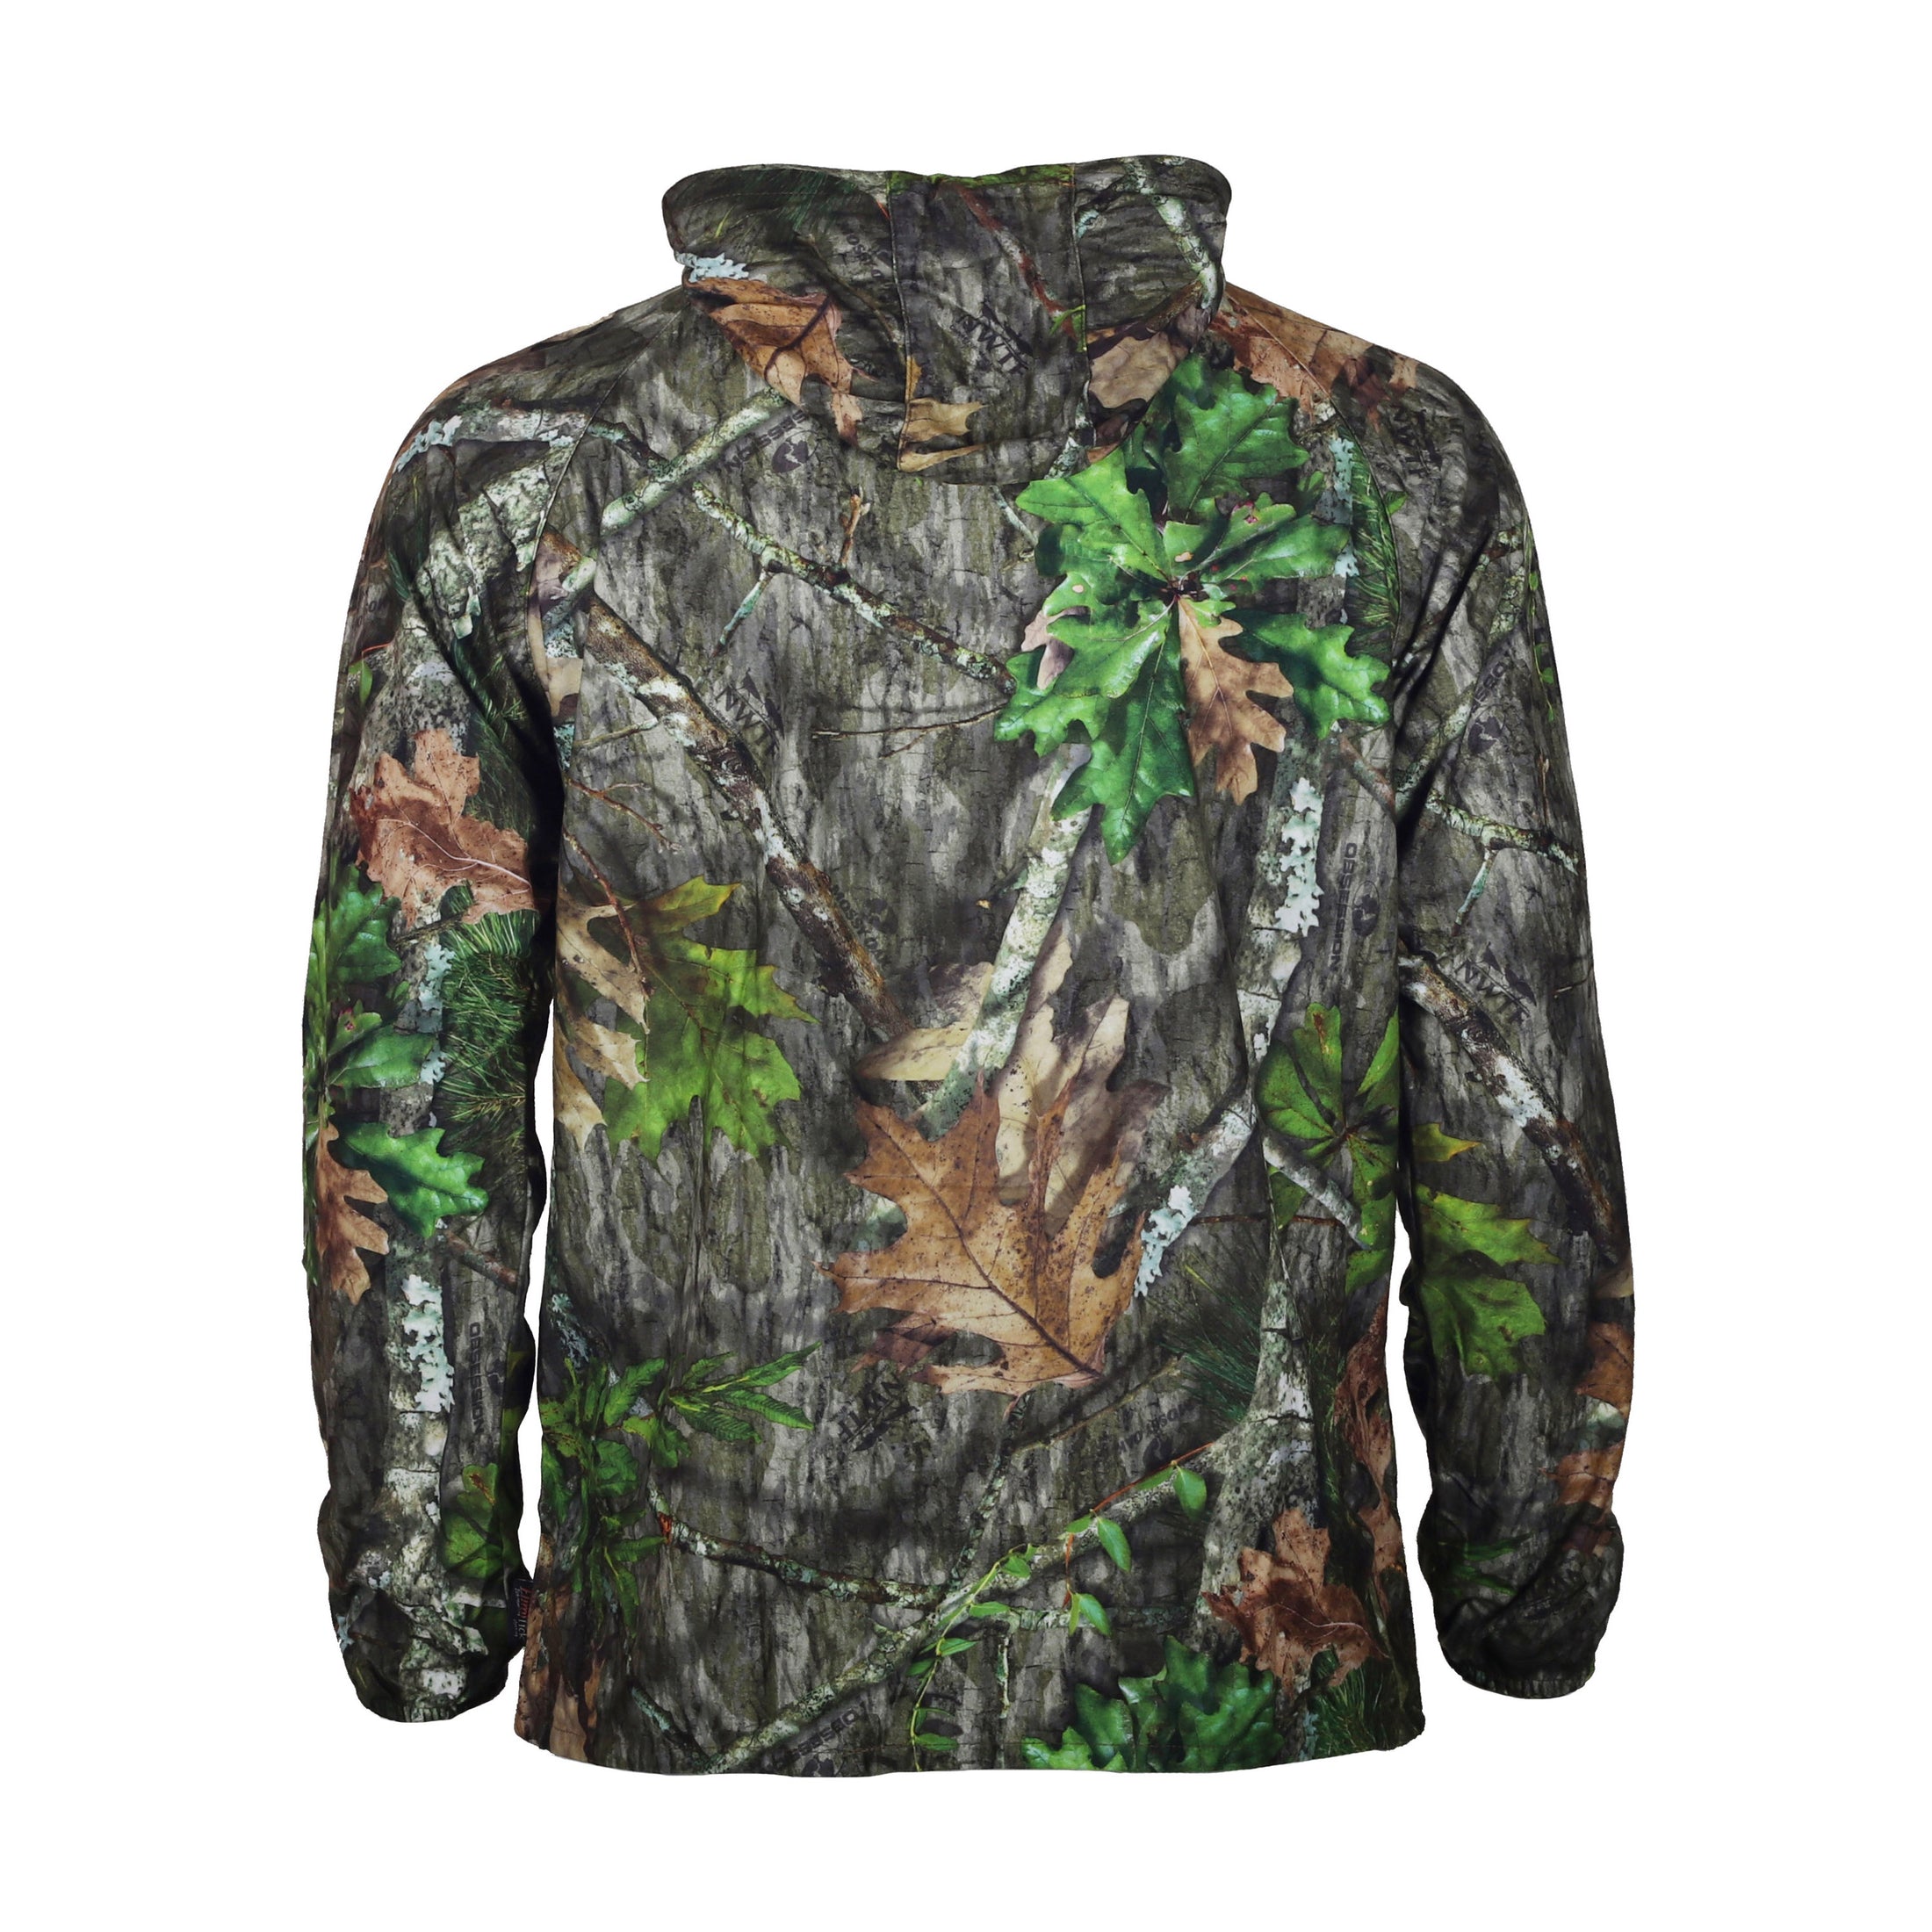 gamehide ElimiTick Insect Repellent Cover Up Jacket back (mossy oak obsession)